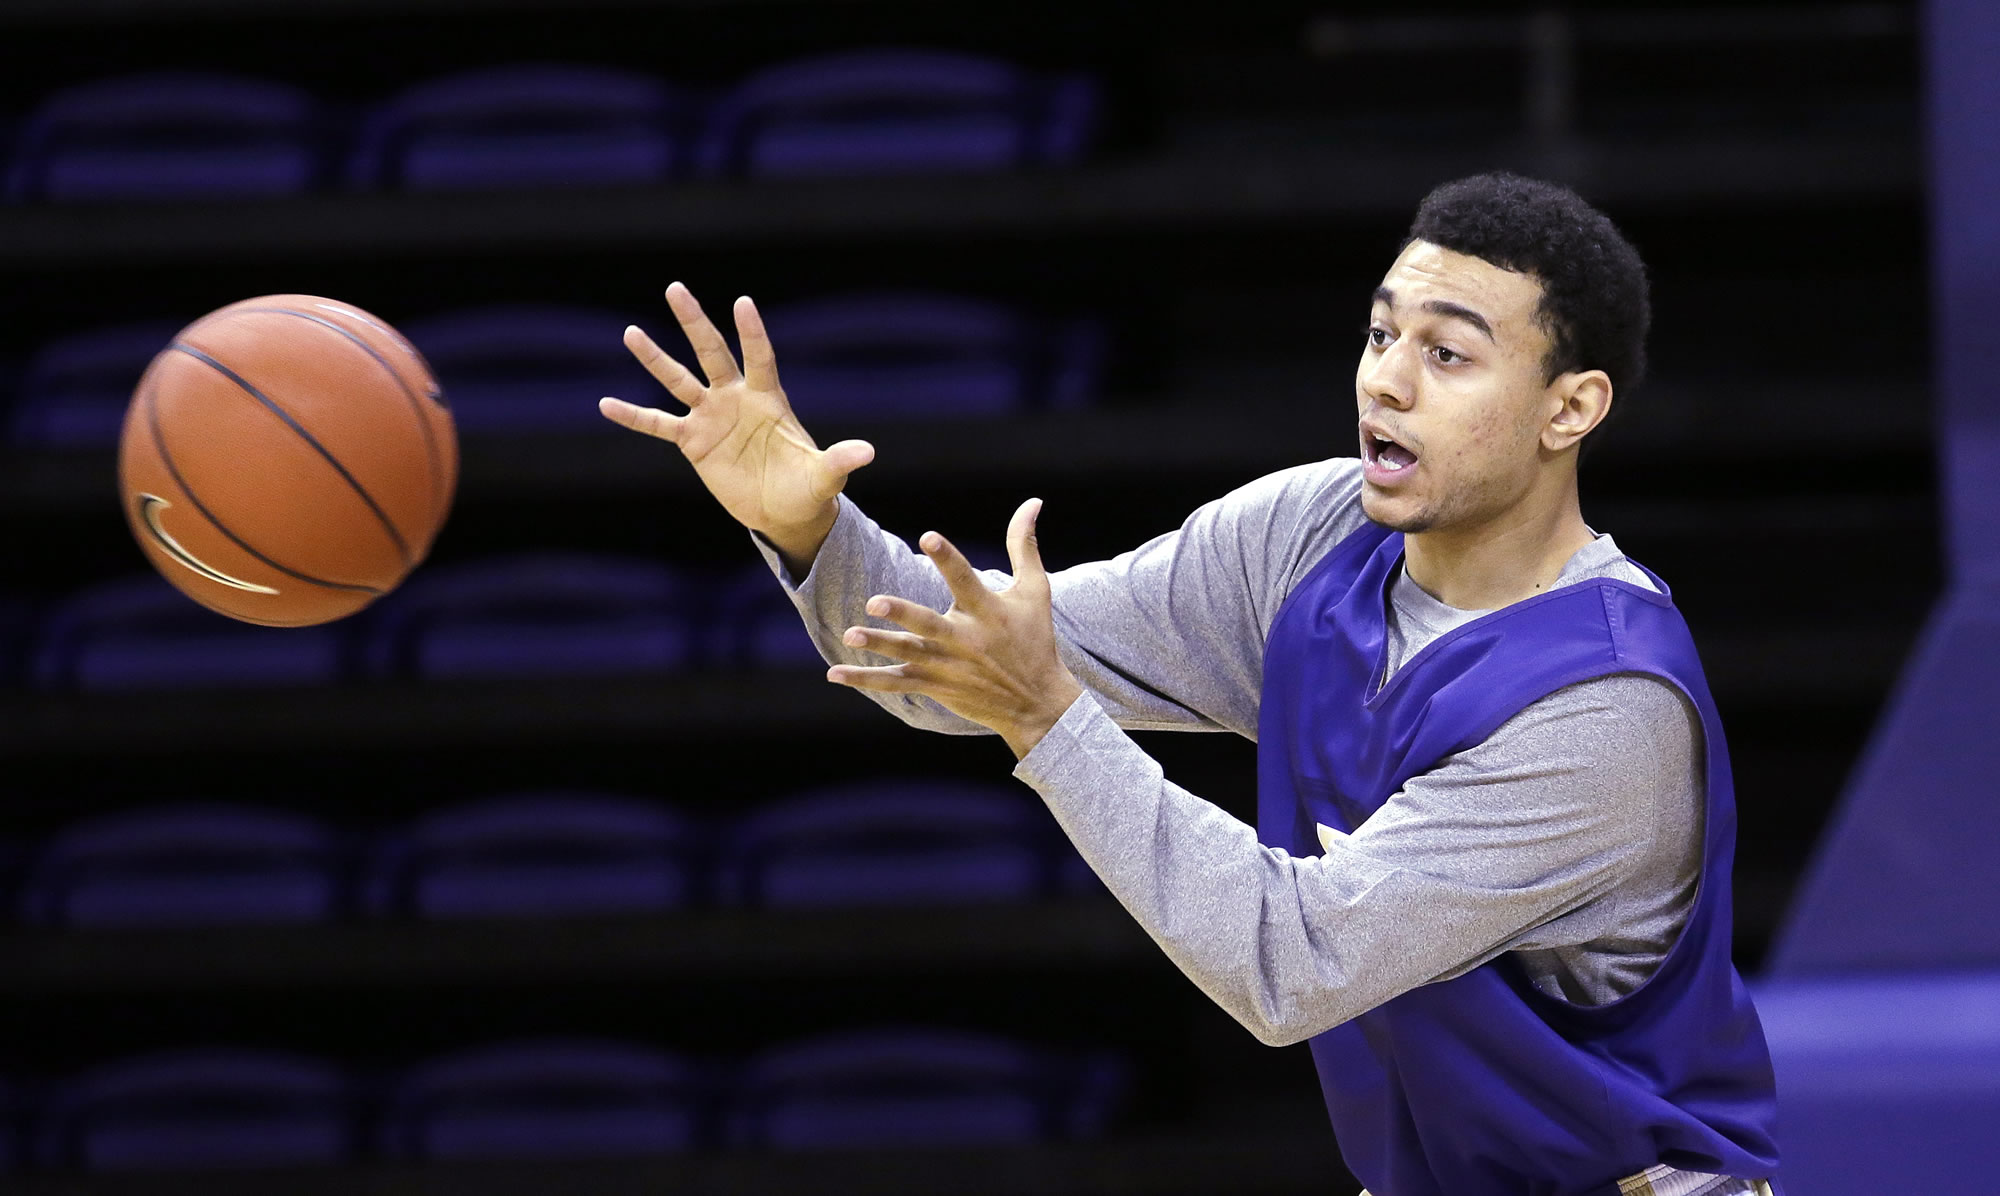 Washington's Nigel Williams-Goss, a freshman from Henderson, Nev., played this summer for the U.S.